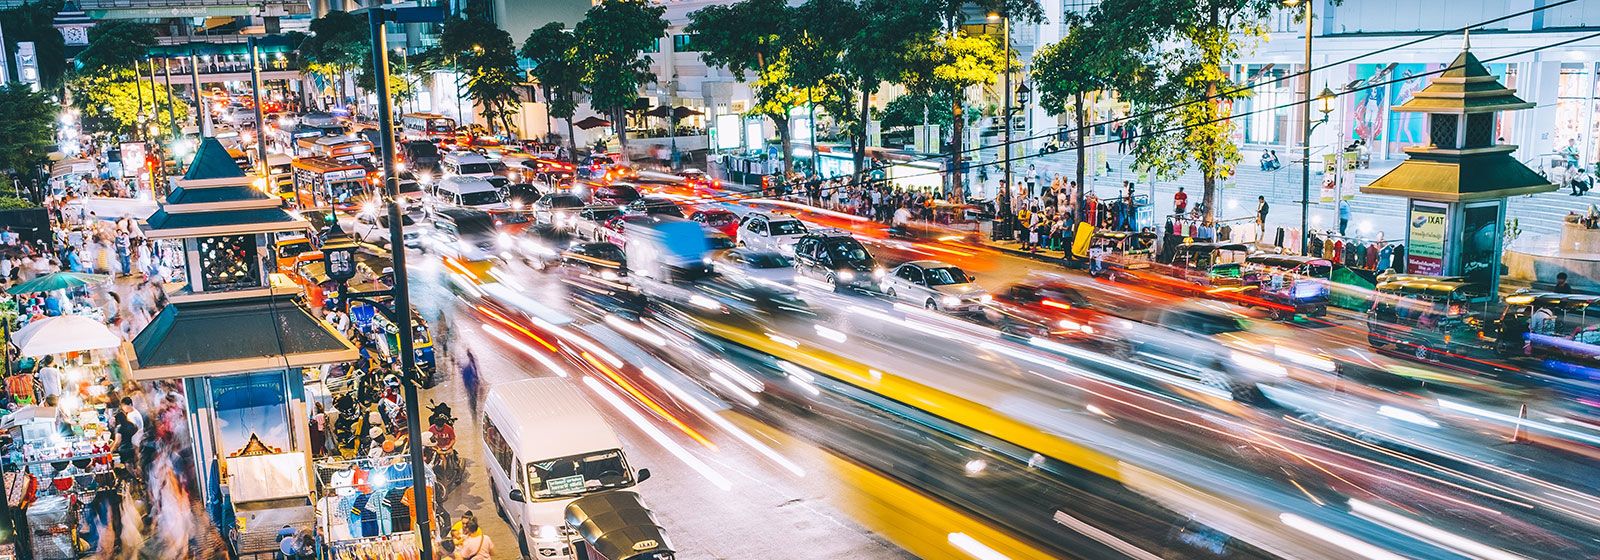 Still image of a time lapse of a busy street in Bangkok